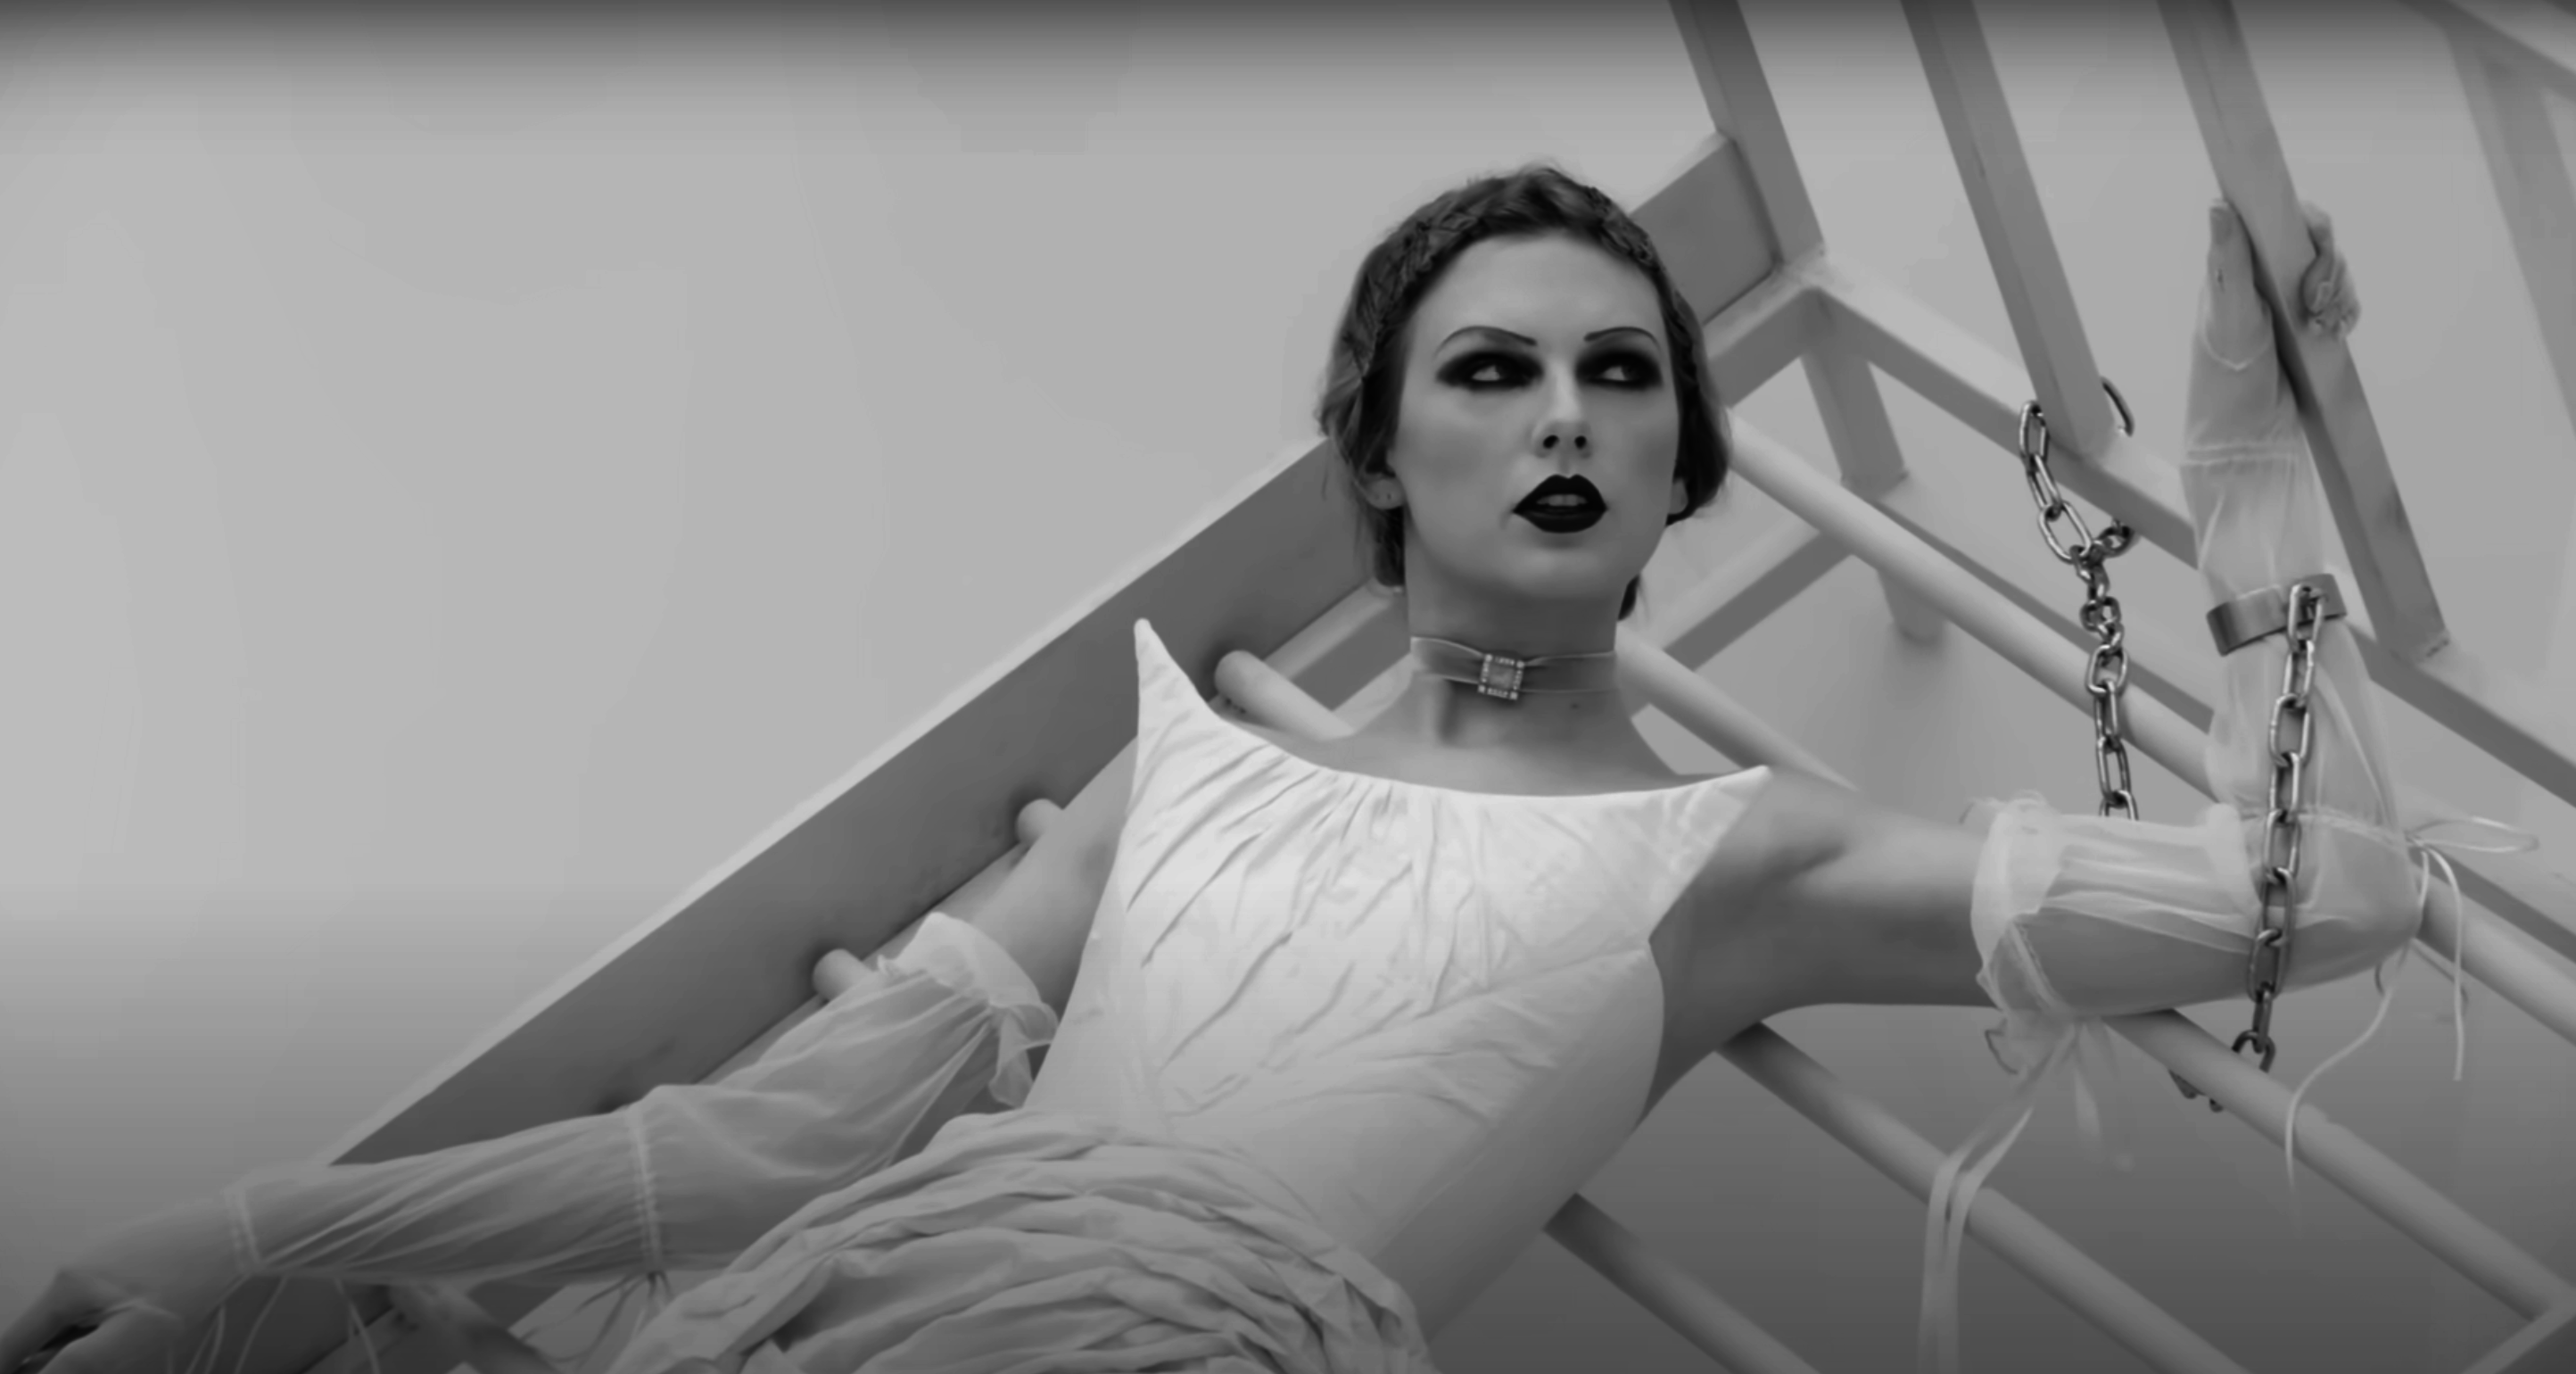 in music video scene, Taylor in a stylish gown, bound by chains, with a dramatic expression